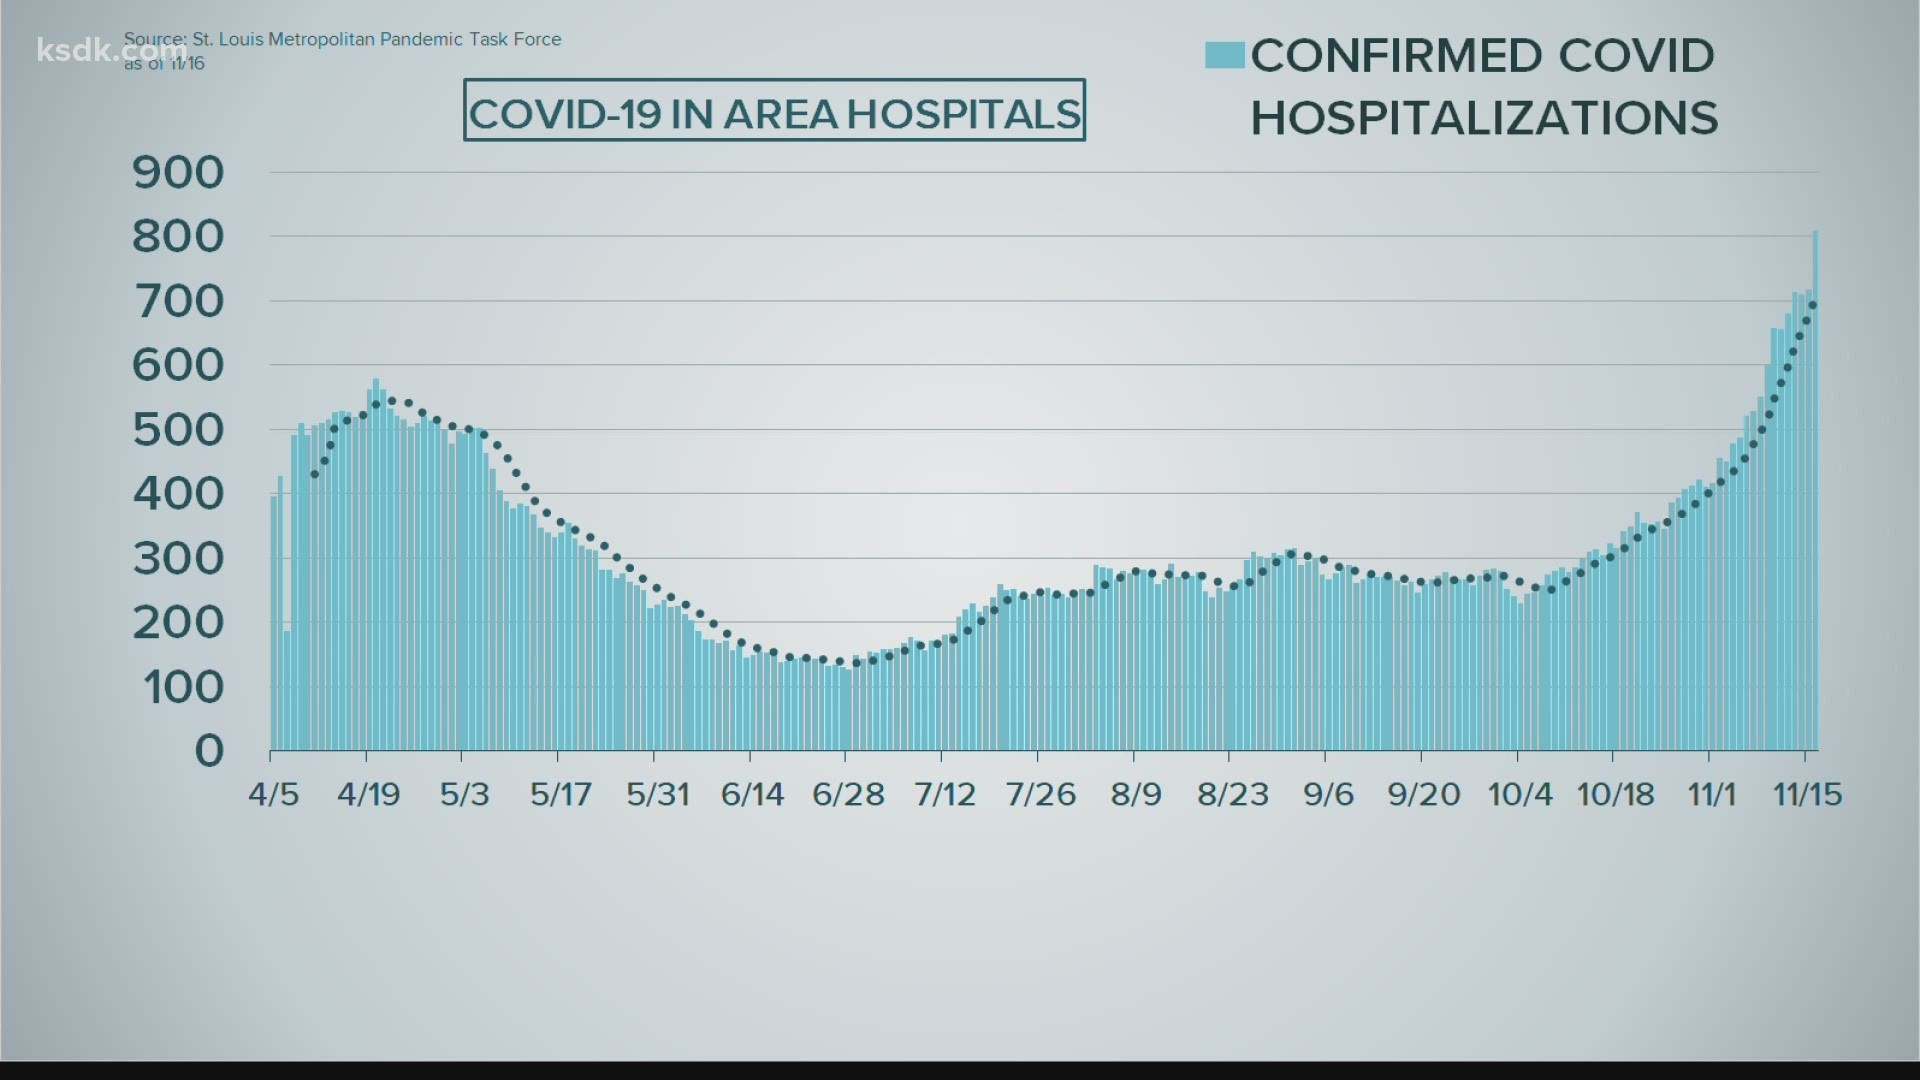 COVID-19 in St. Louis, Missouri: record hospital admissions | www.paulmartinsmith.com